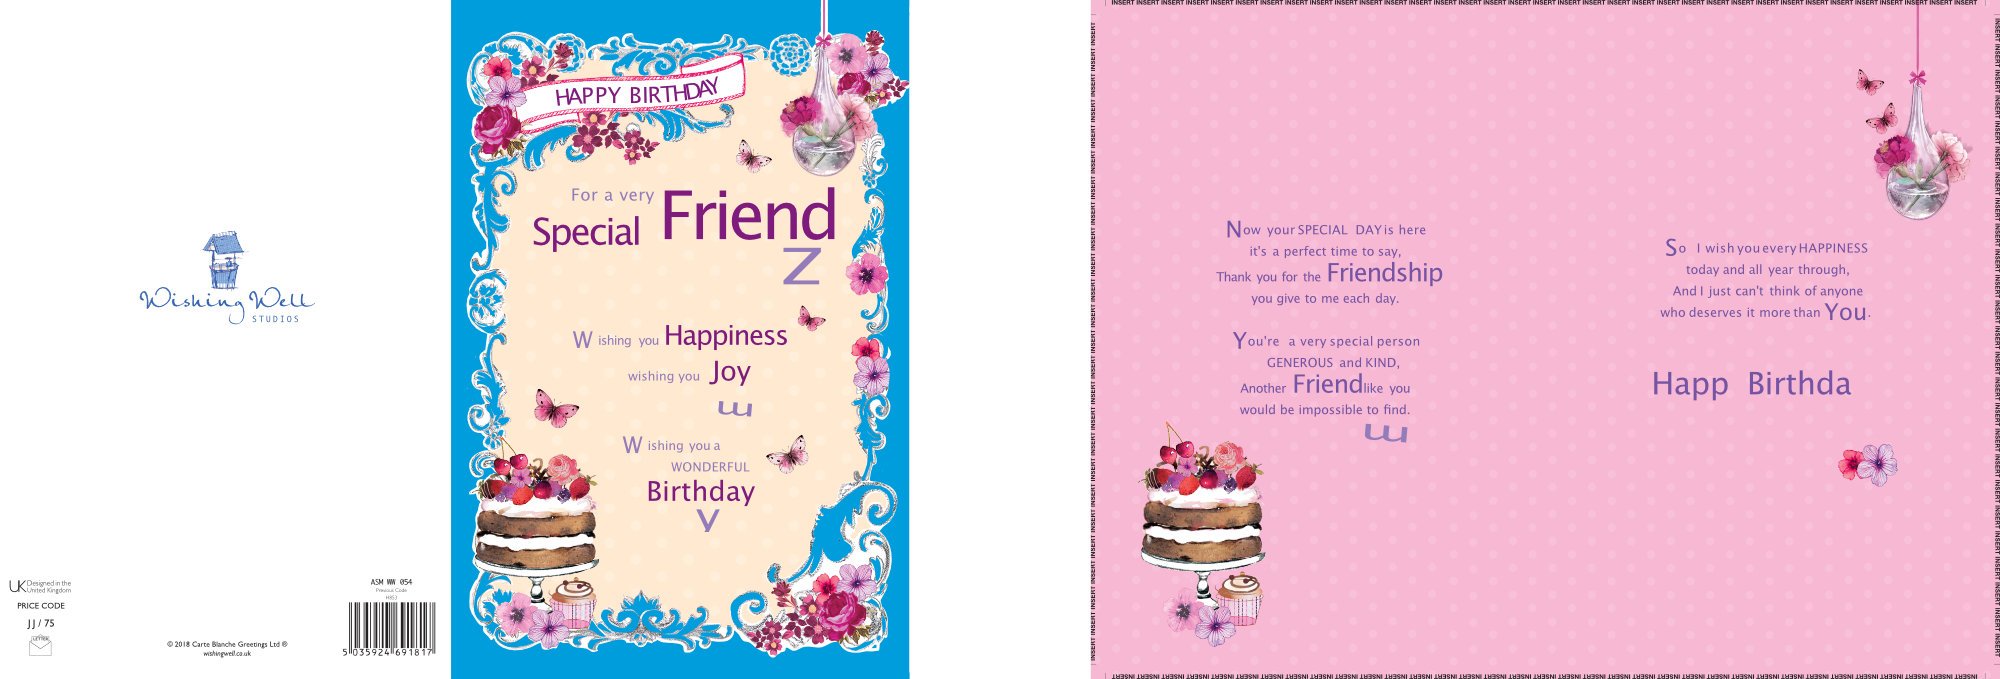 Photograph of Special Friend Birthday Happiness Greetings Card at Nicole's Shop